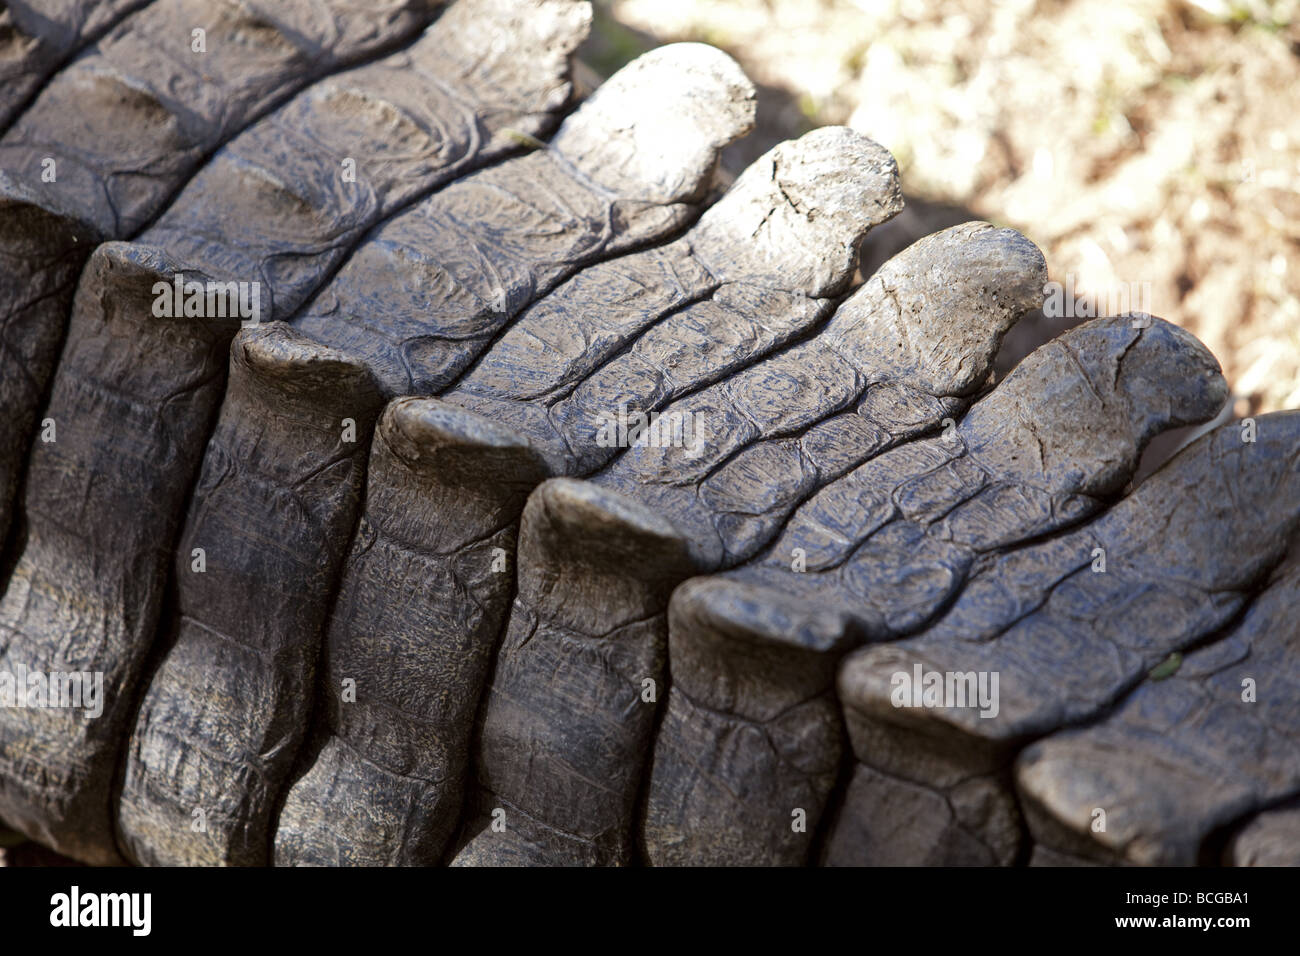 Close up shot of the scales on a Nile Crocodile's tail Stock Photo